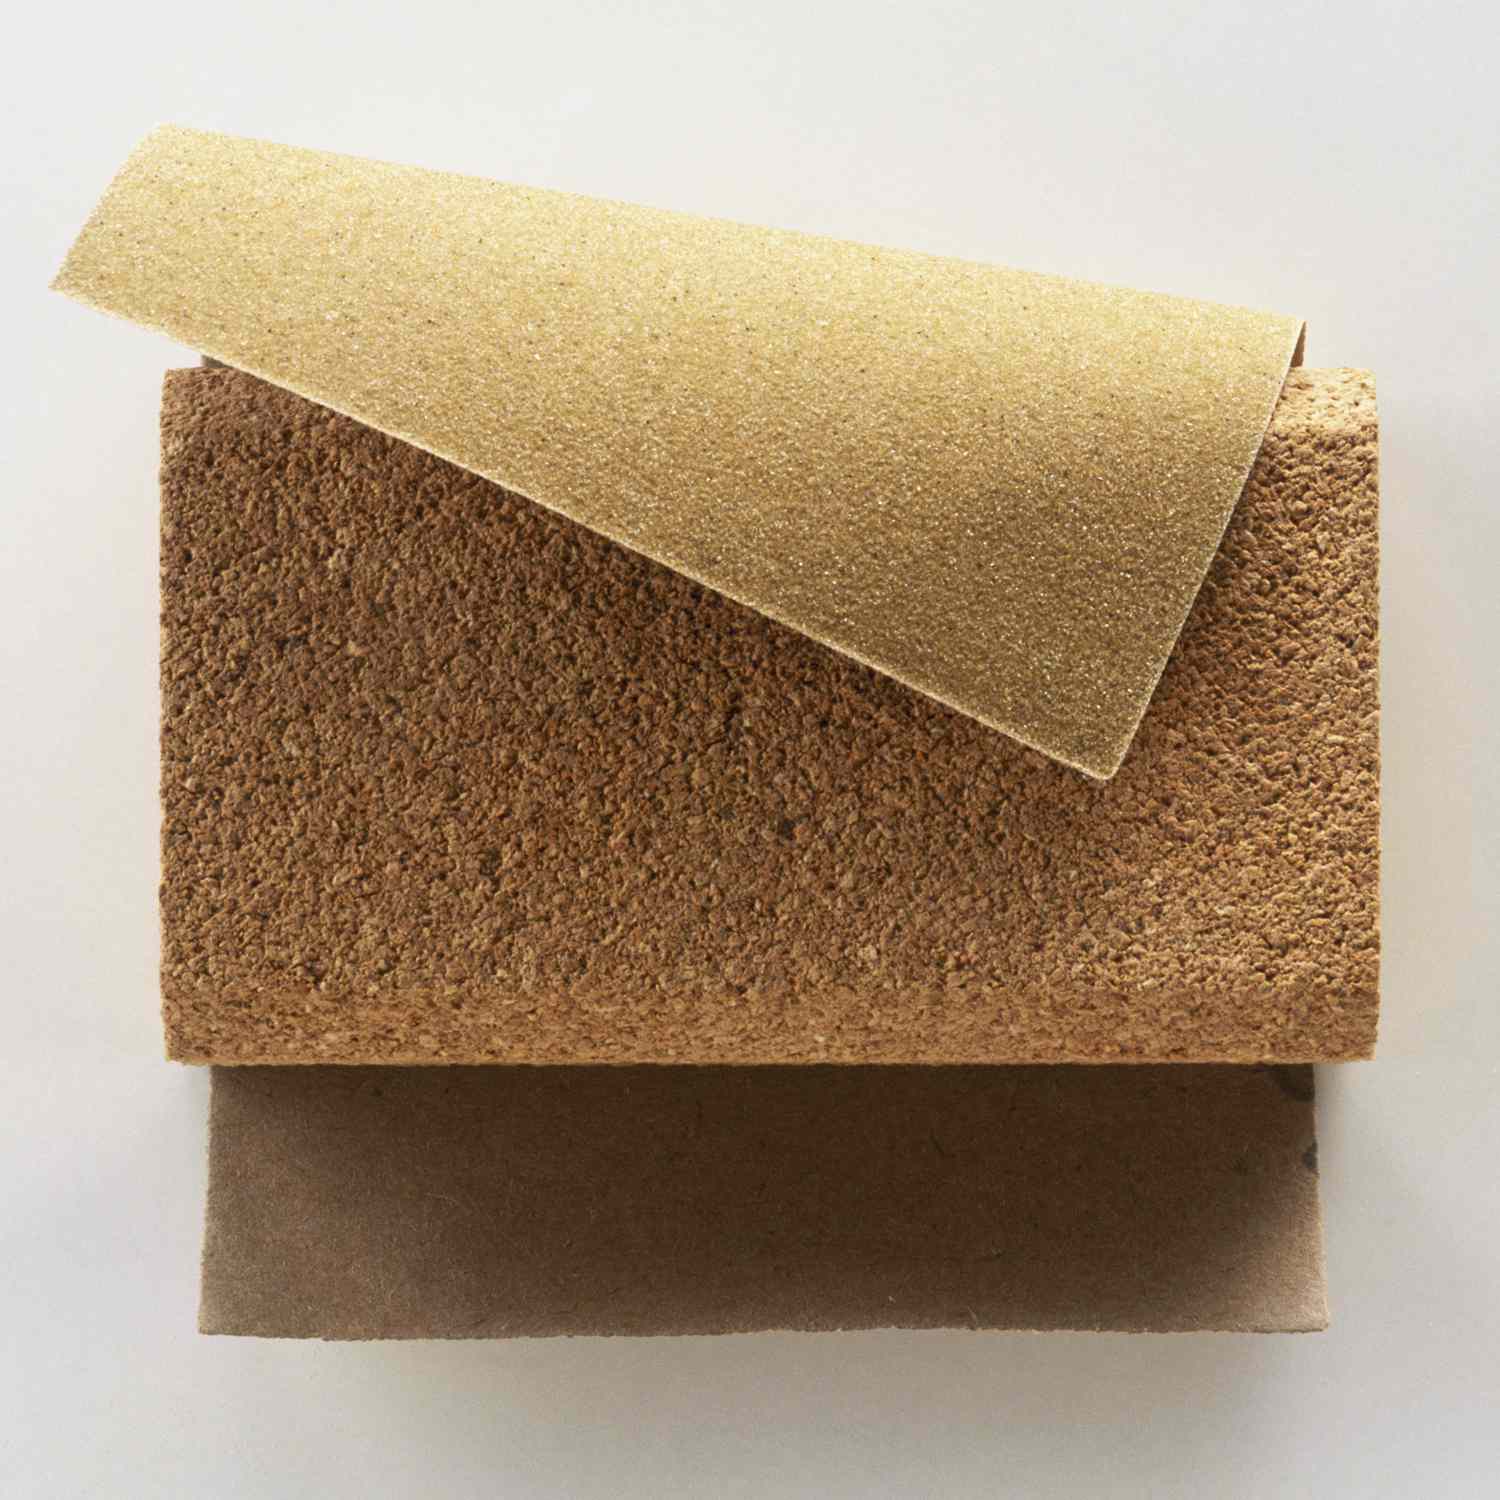 How Long Does A Sandpaper Last